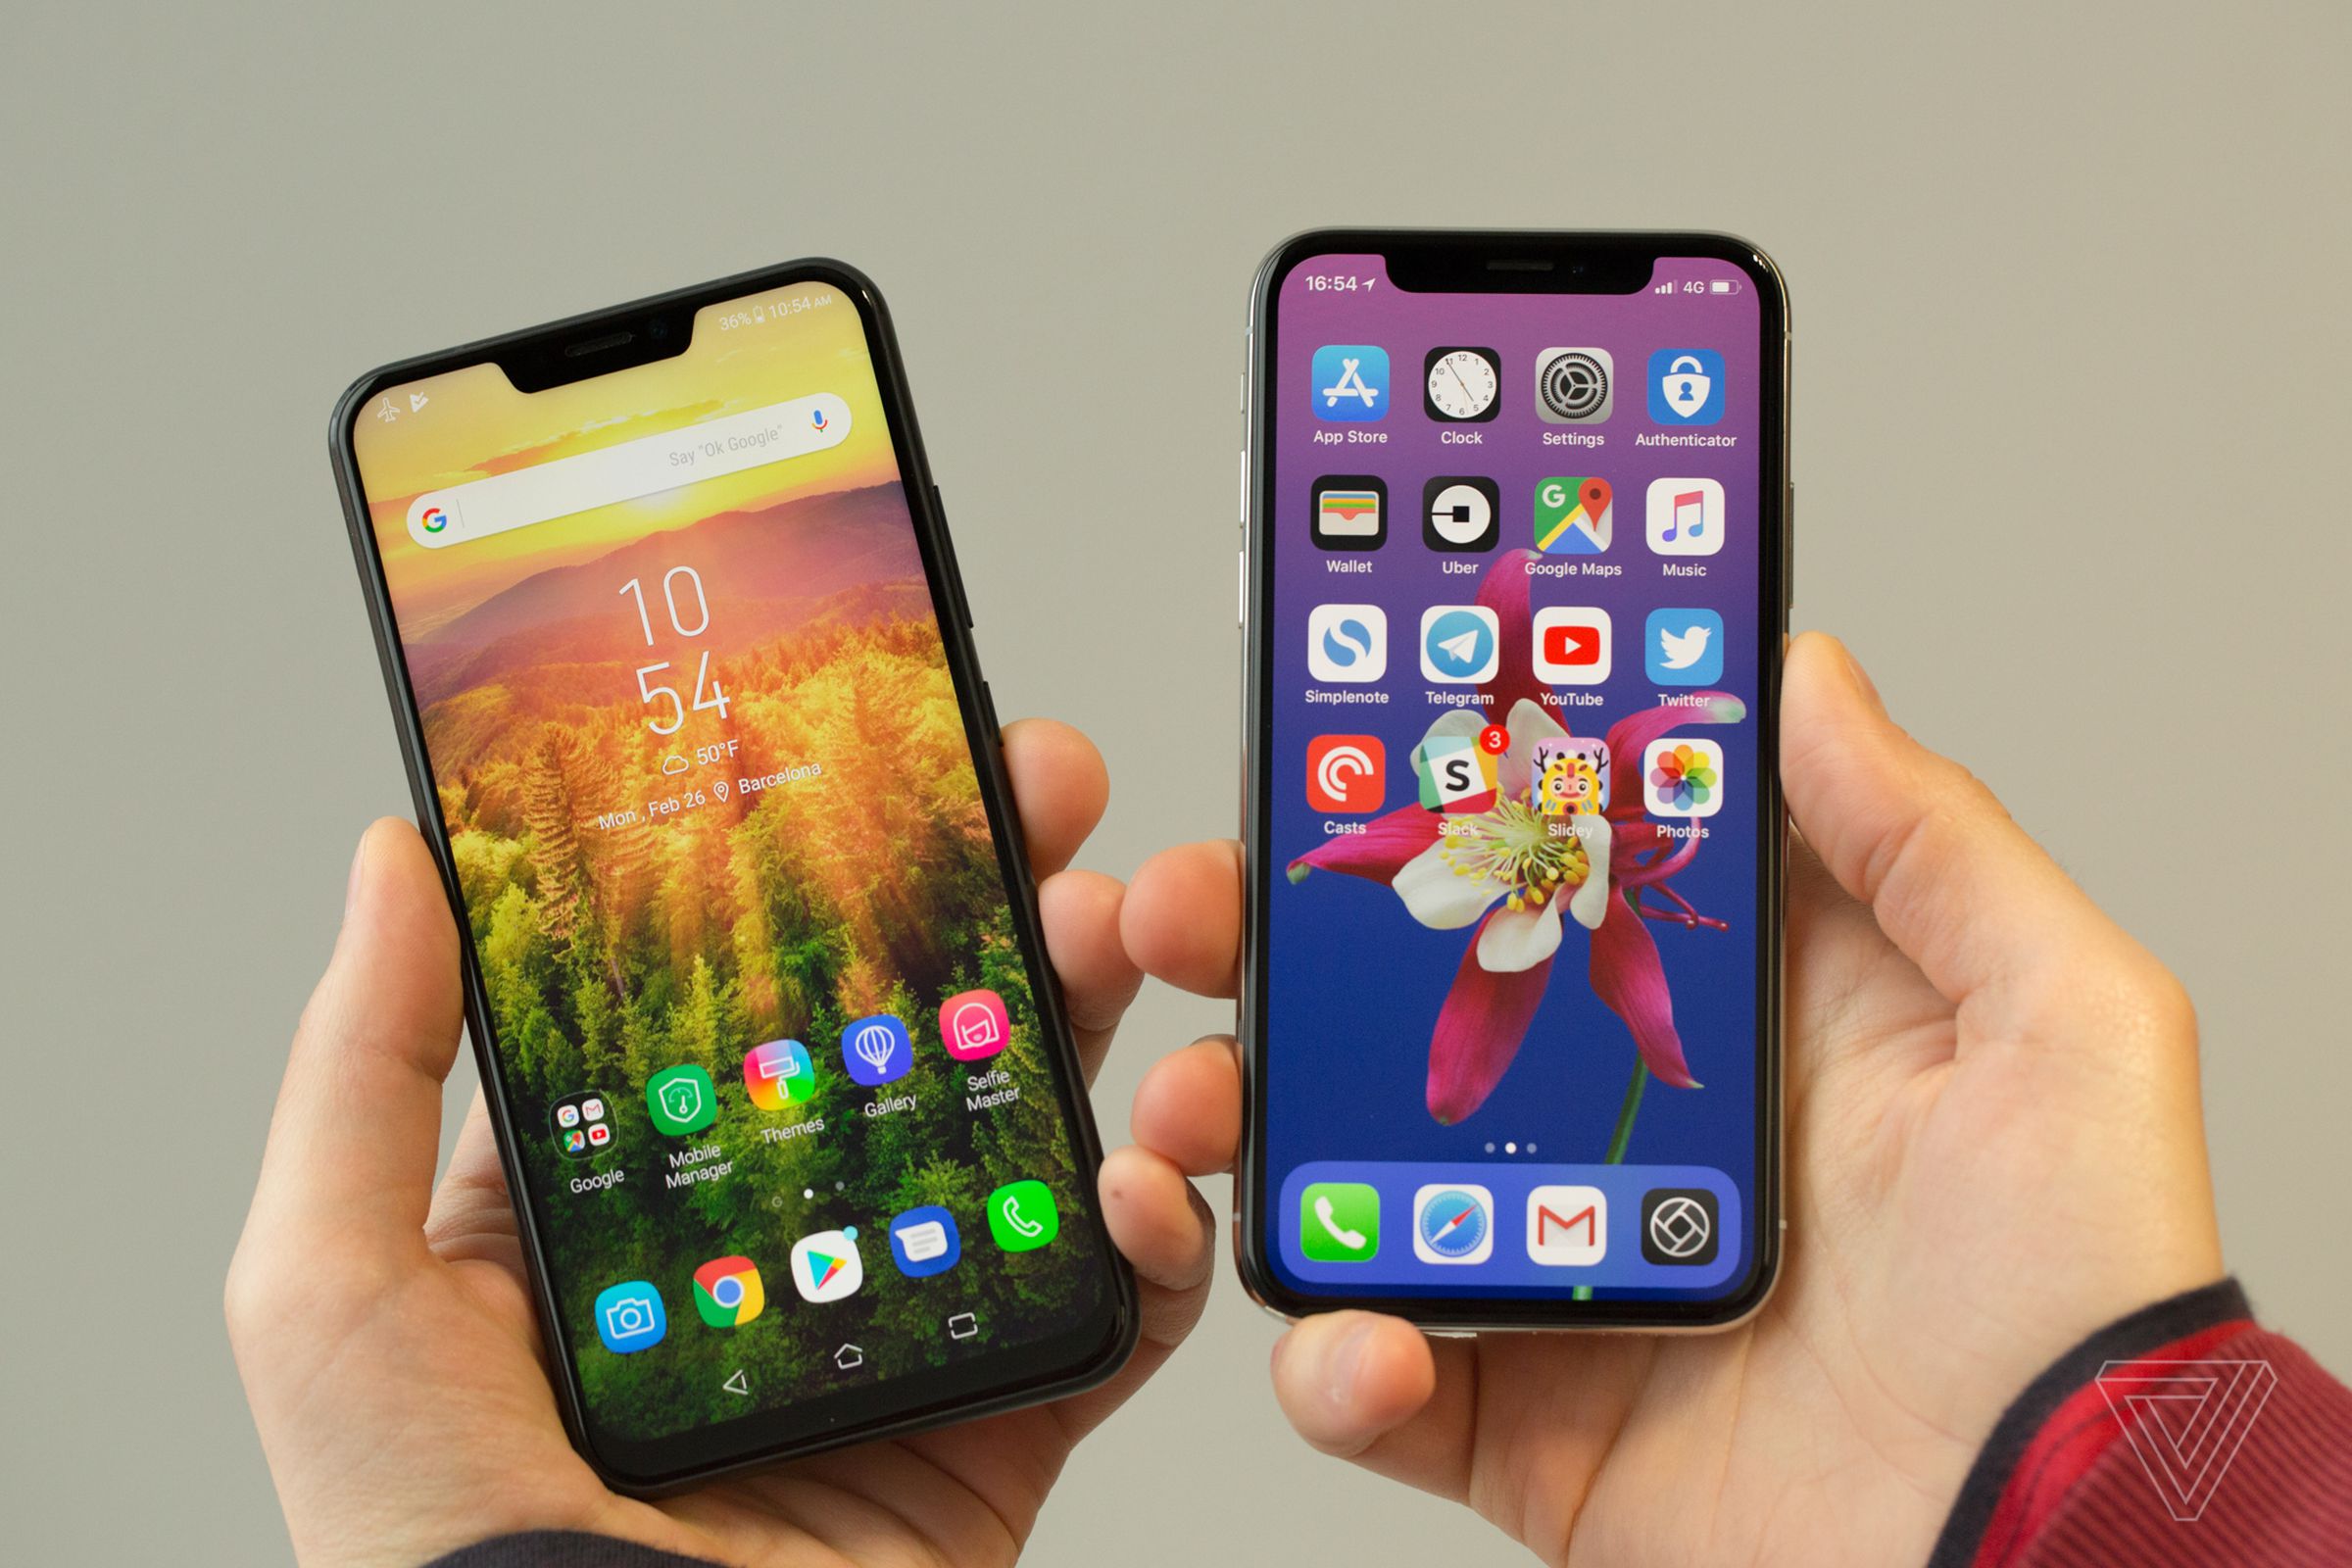 Asus Zenfone 5 and Apple iPhone X